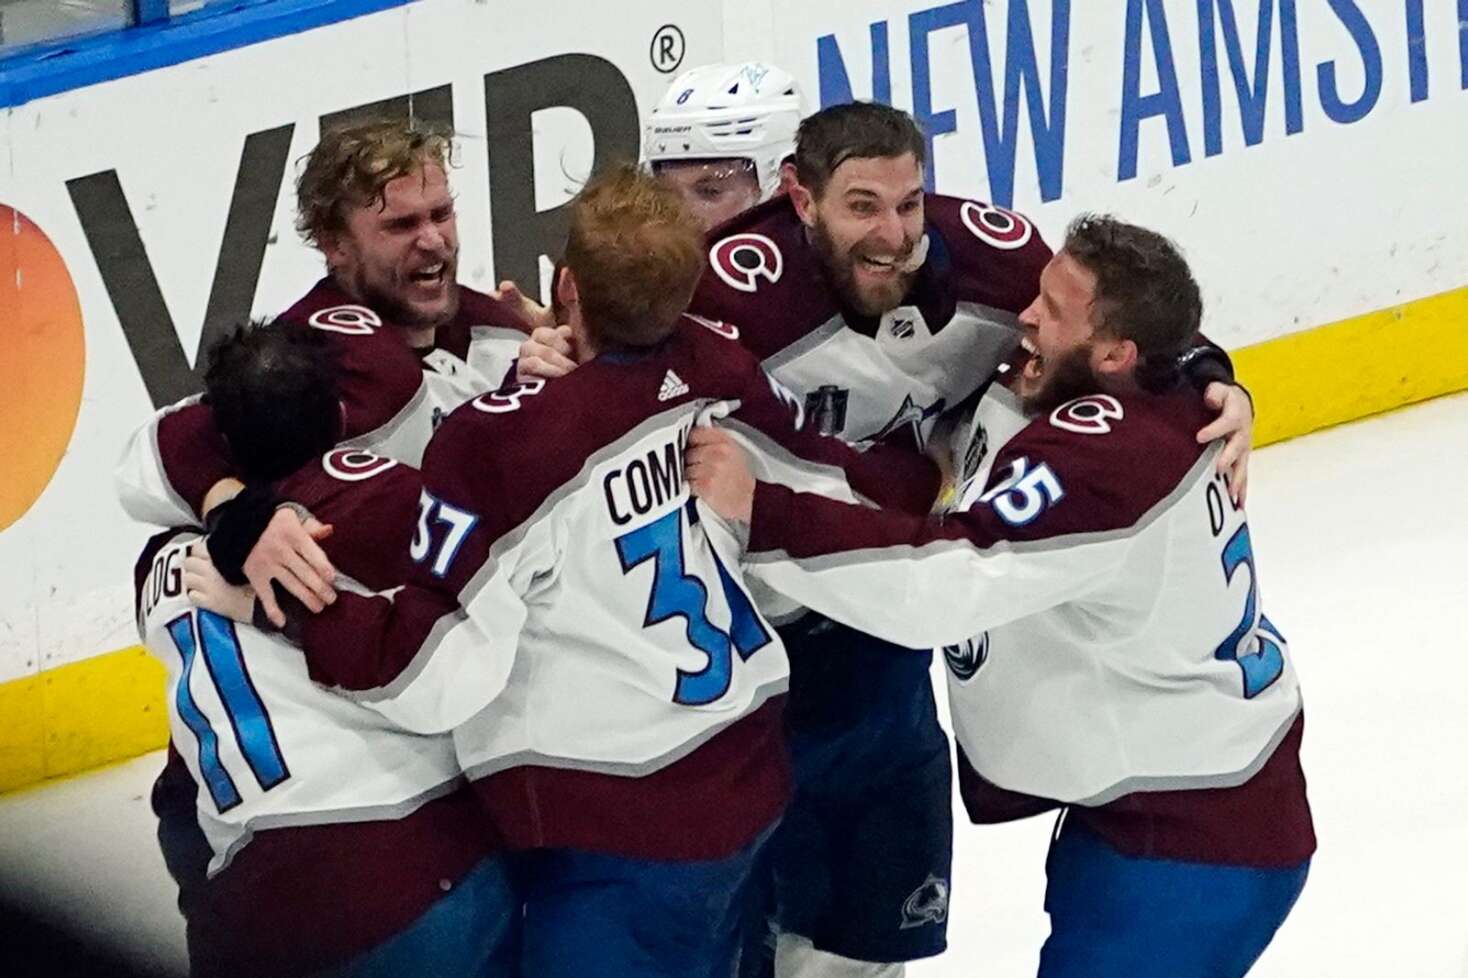 Colorado Avs Preparing for First World Championship Title In Two Decades